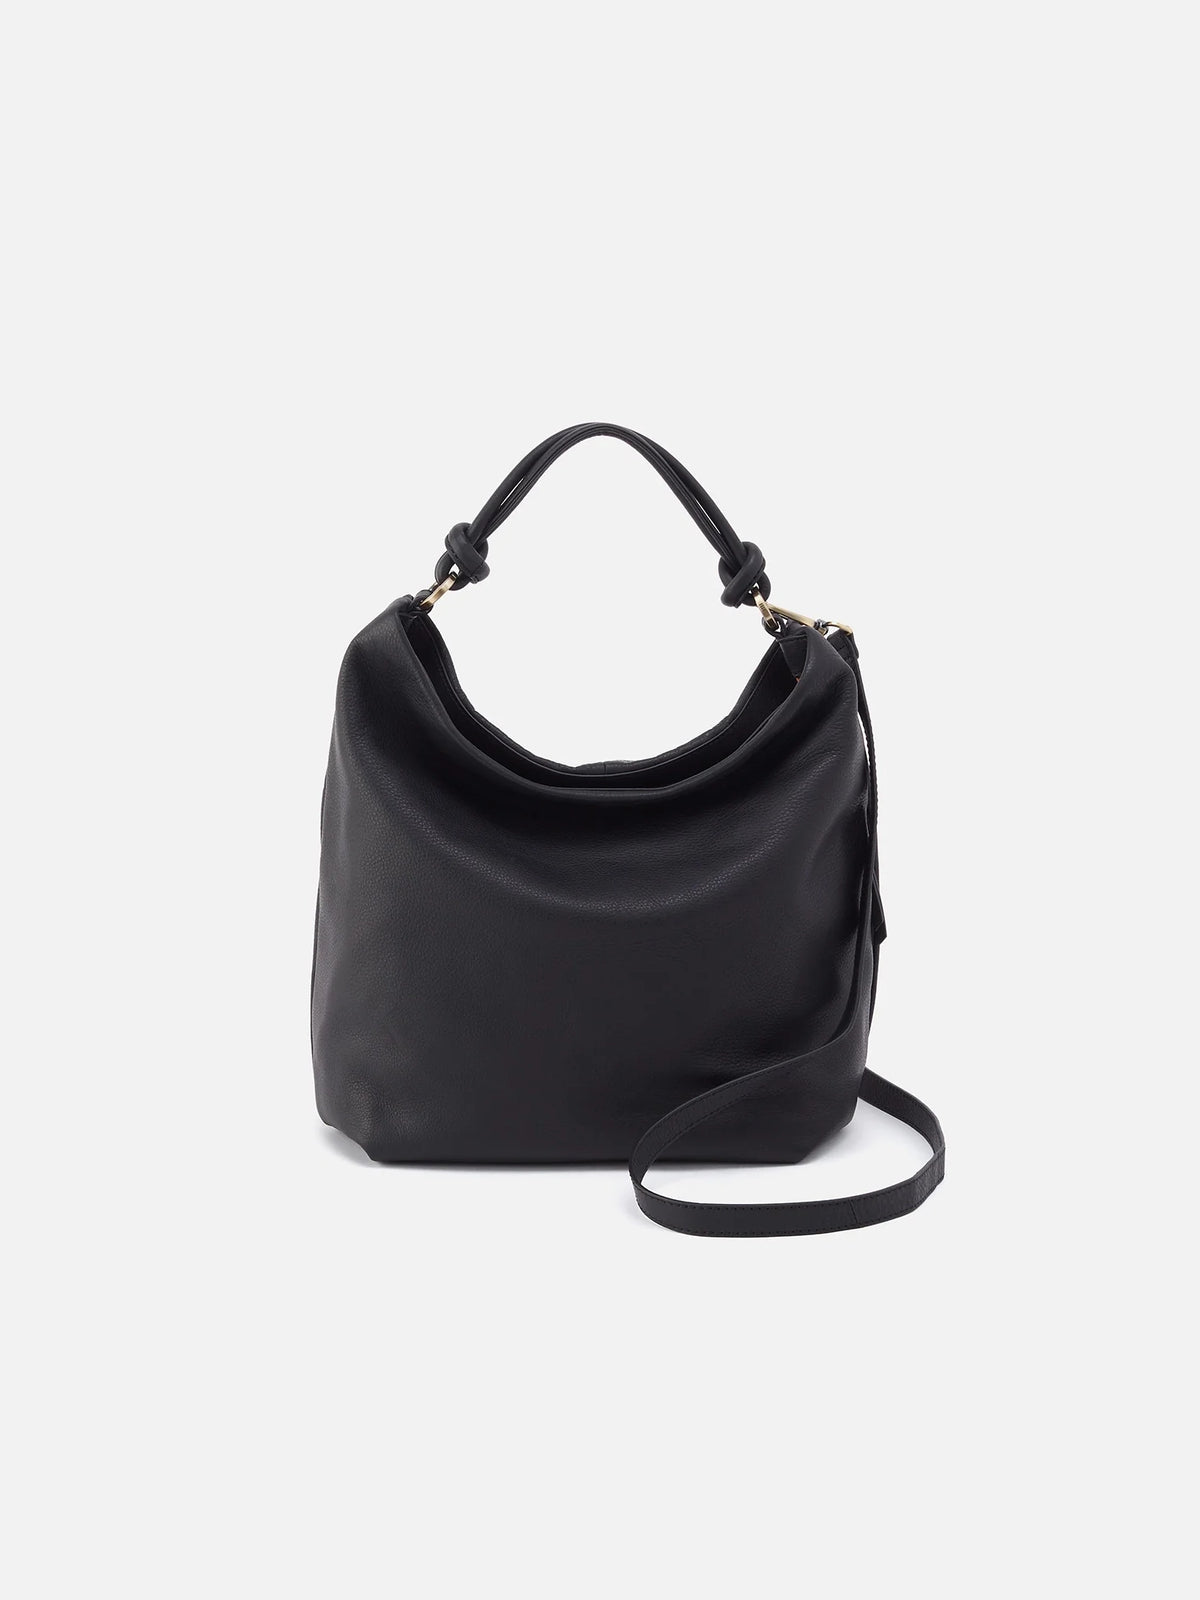 hobo linkley hobo bag soft pebbled leather in black-front view